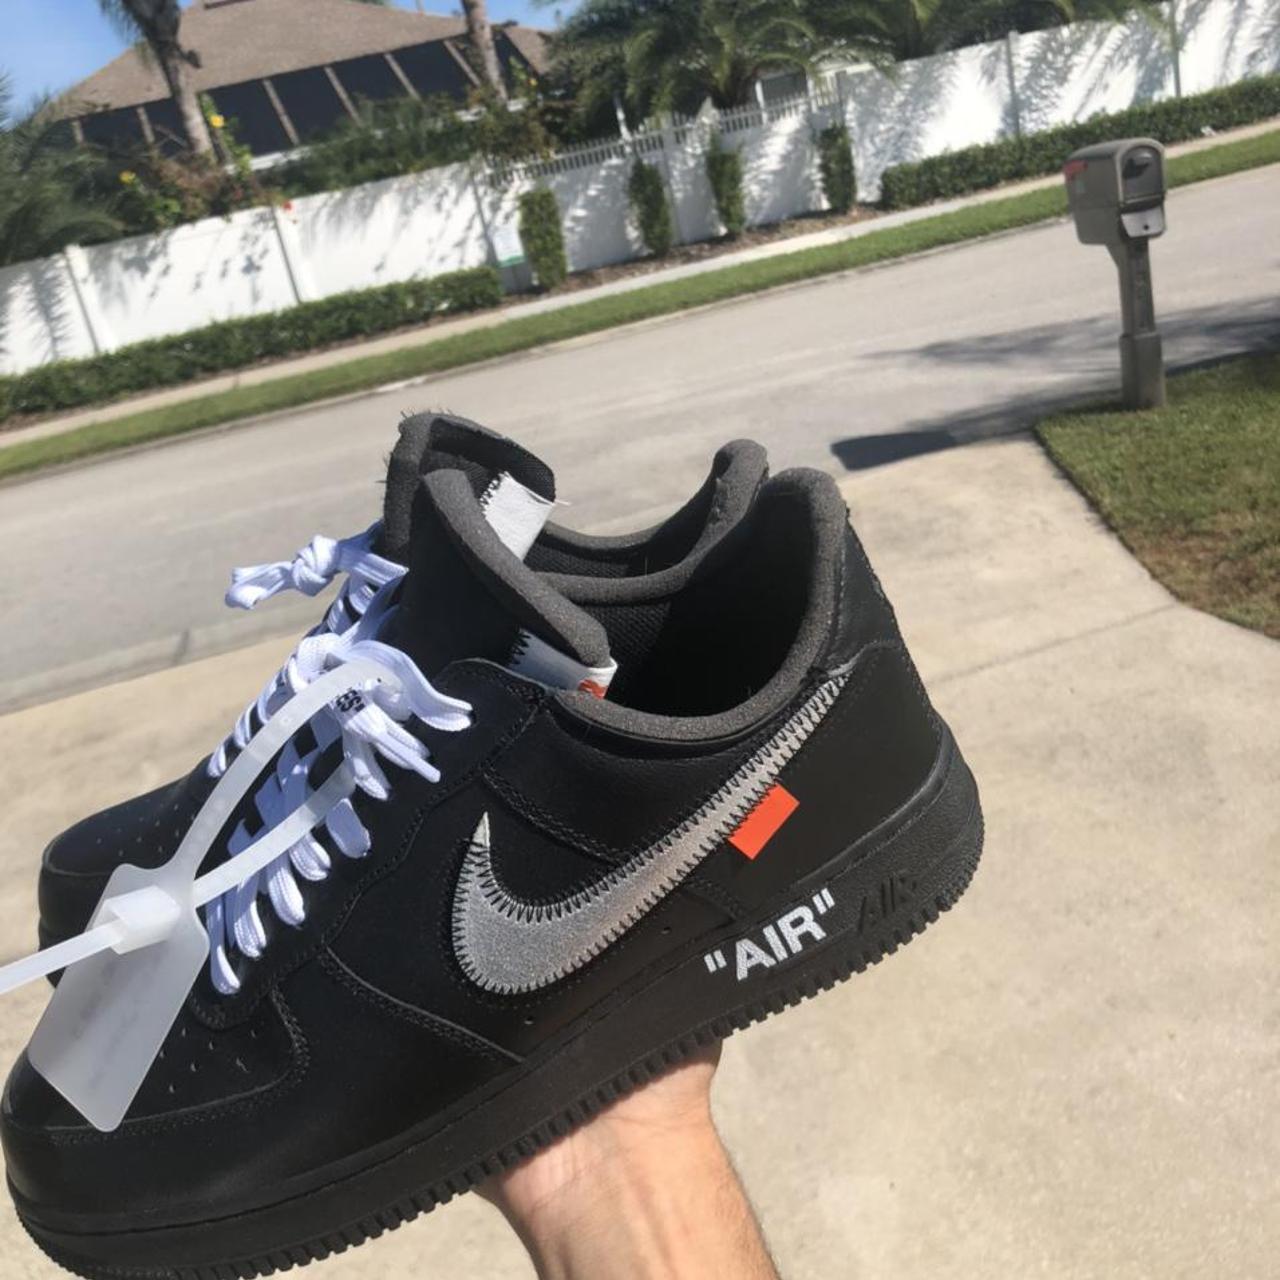 Offwhite Air Force 1 “moma” comes with og box